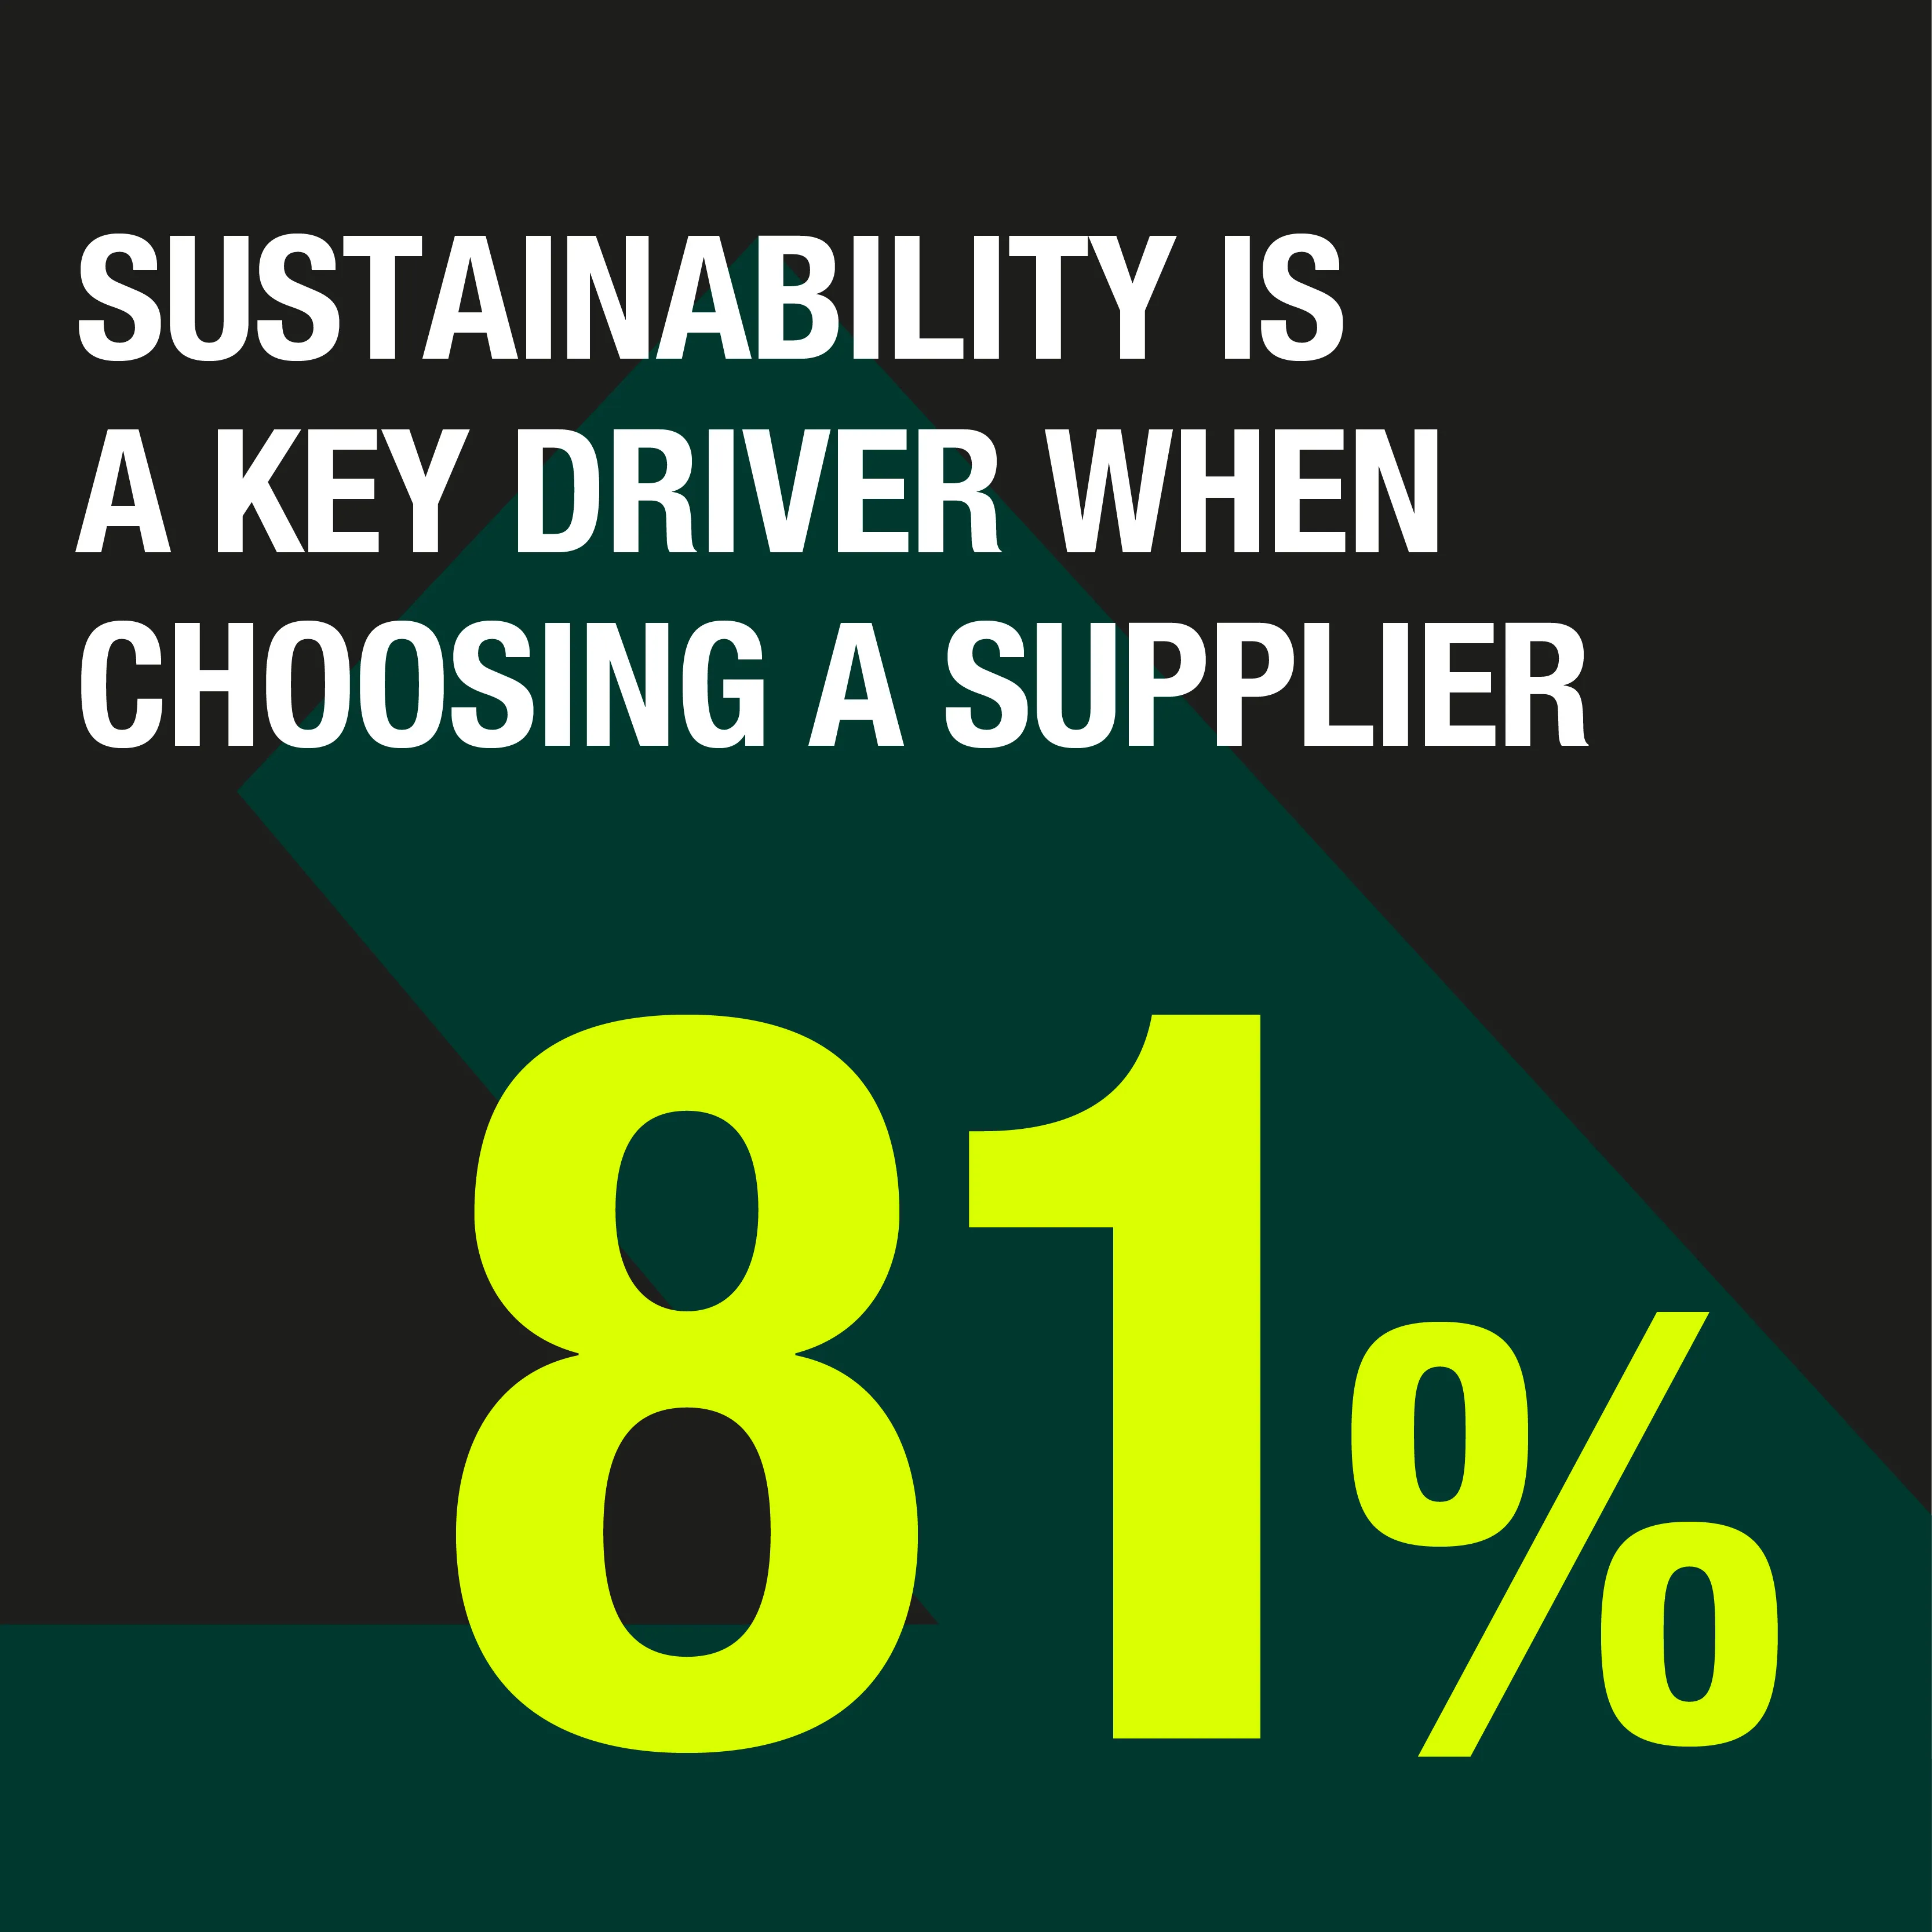 81% say sustainability is a key driver